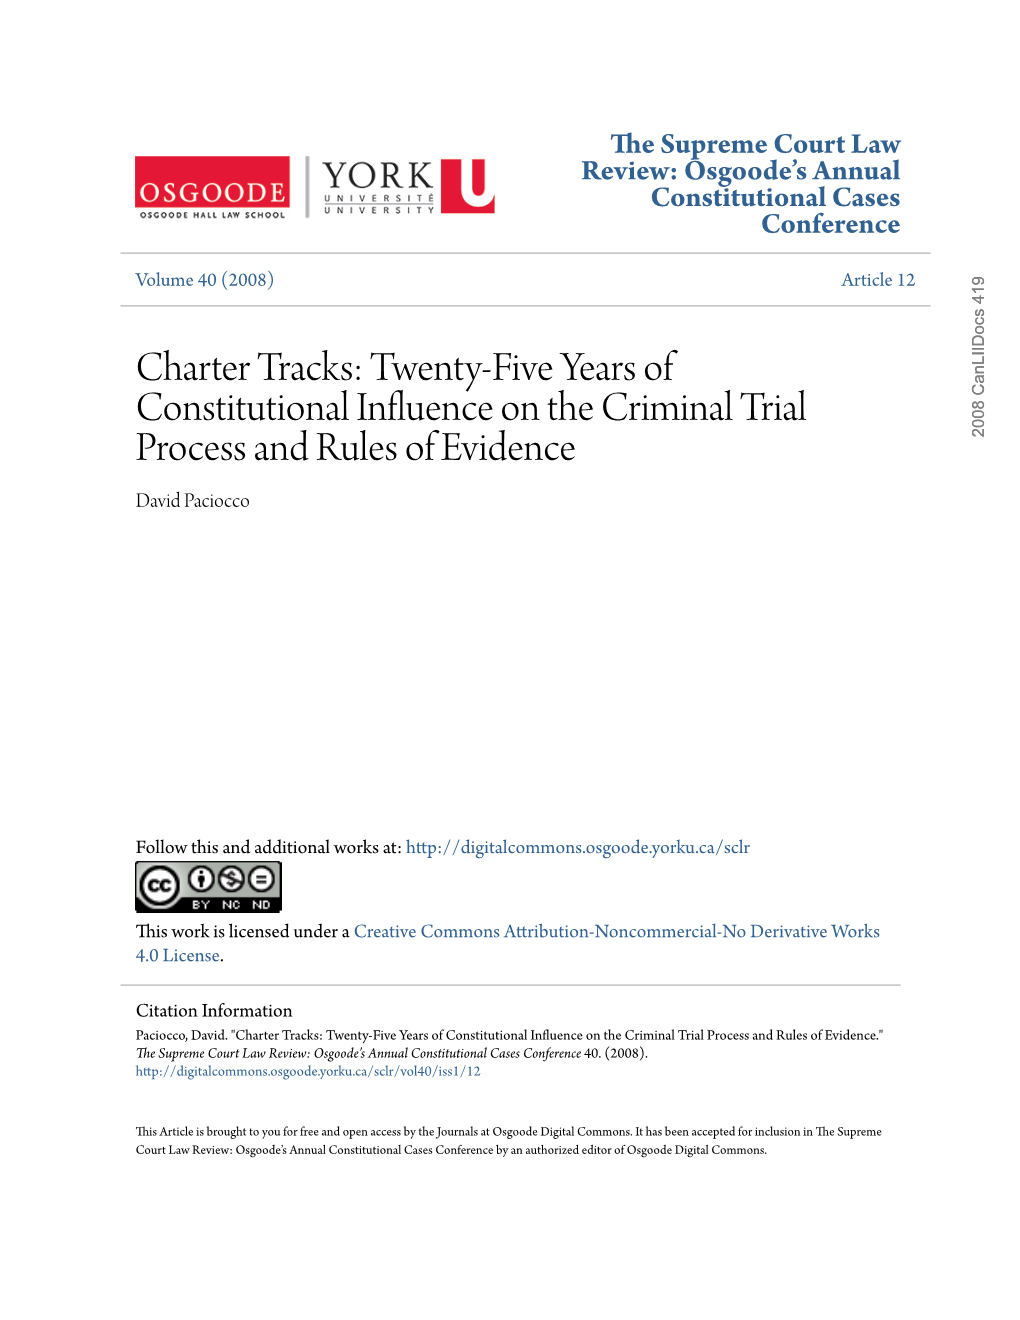 Twenty-Five Years of Constitutional Influence on the Criminal Trial Process and Rules of Evidence 2008 Canliidocs 419 David Paciocco